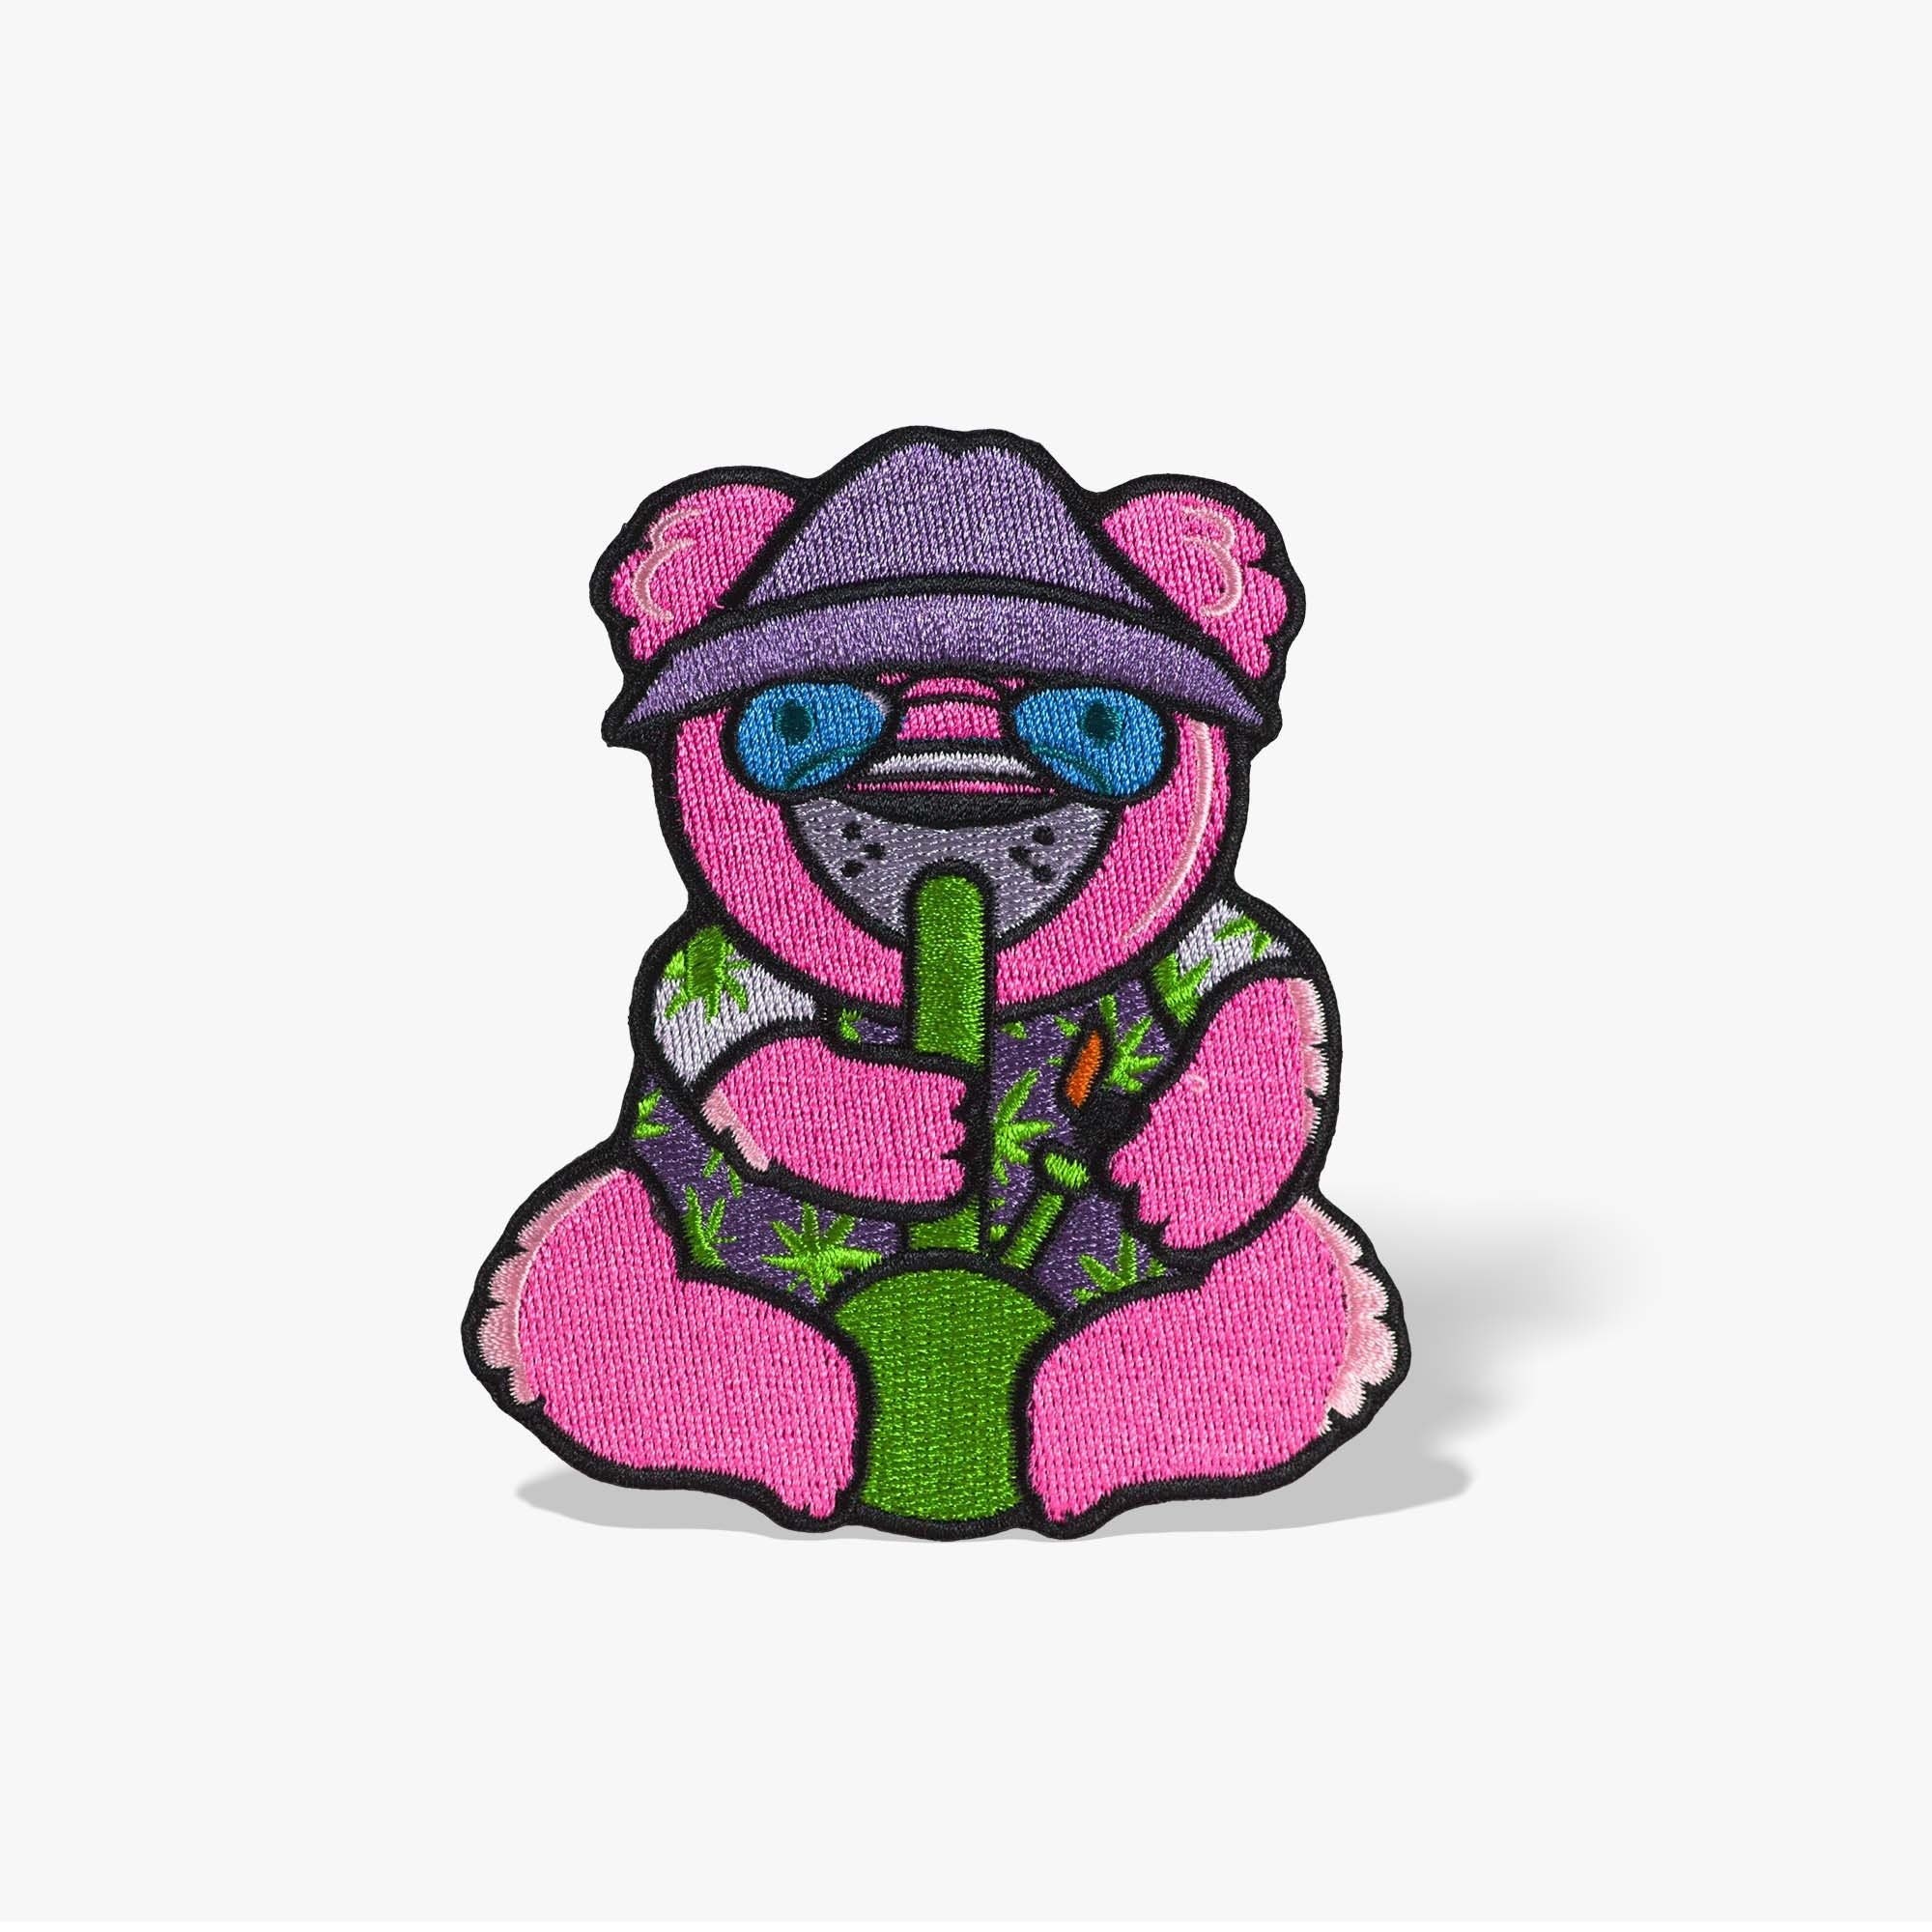 Stoner Iron On Patch, Teddy Bear Smoking Bong Cannabis Patch, Stoner Gifts for Her, Punk Patches, 420 Gifts